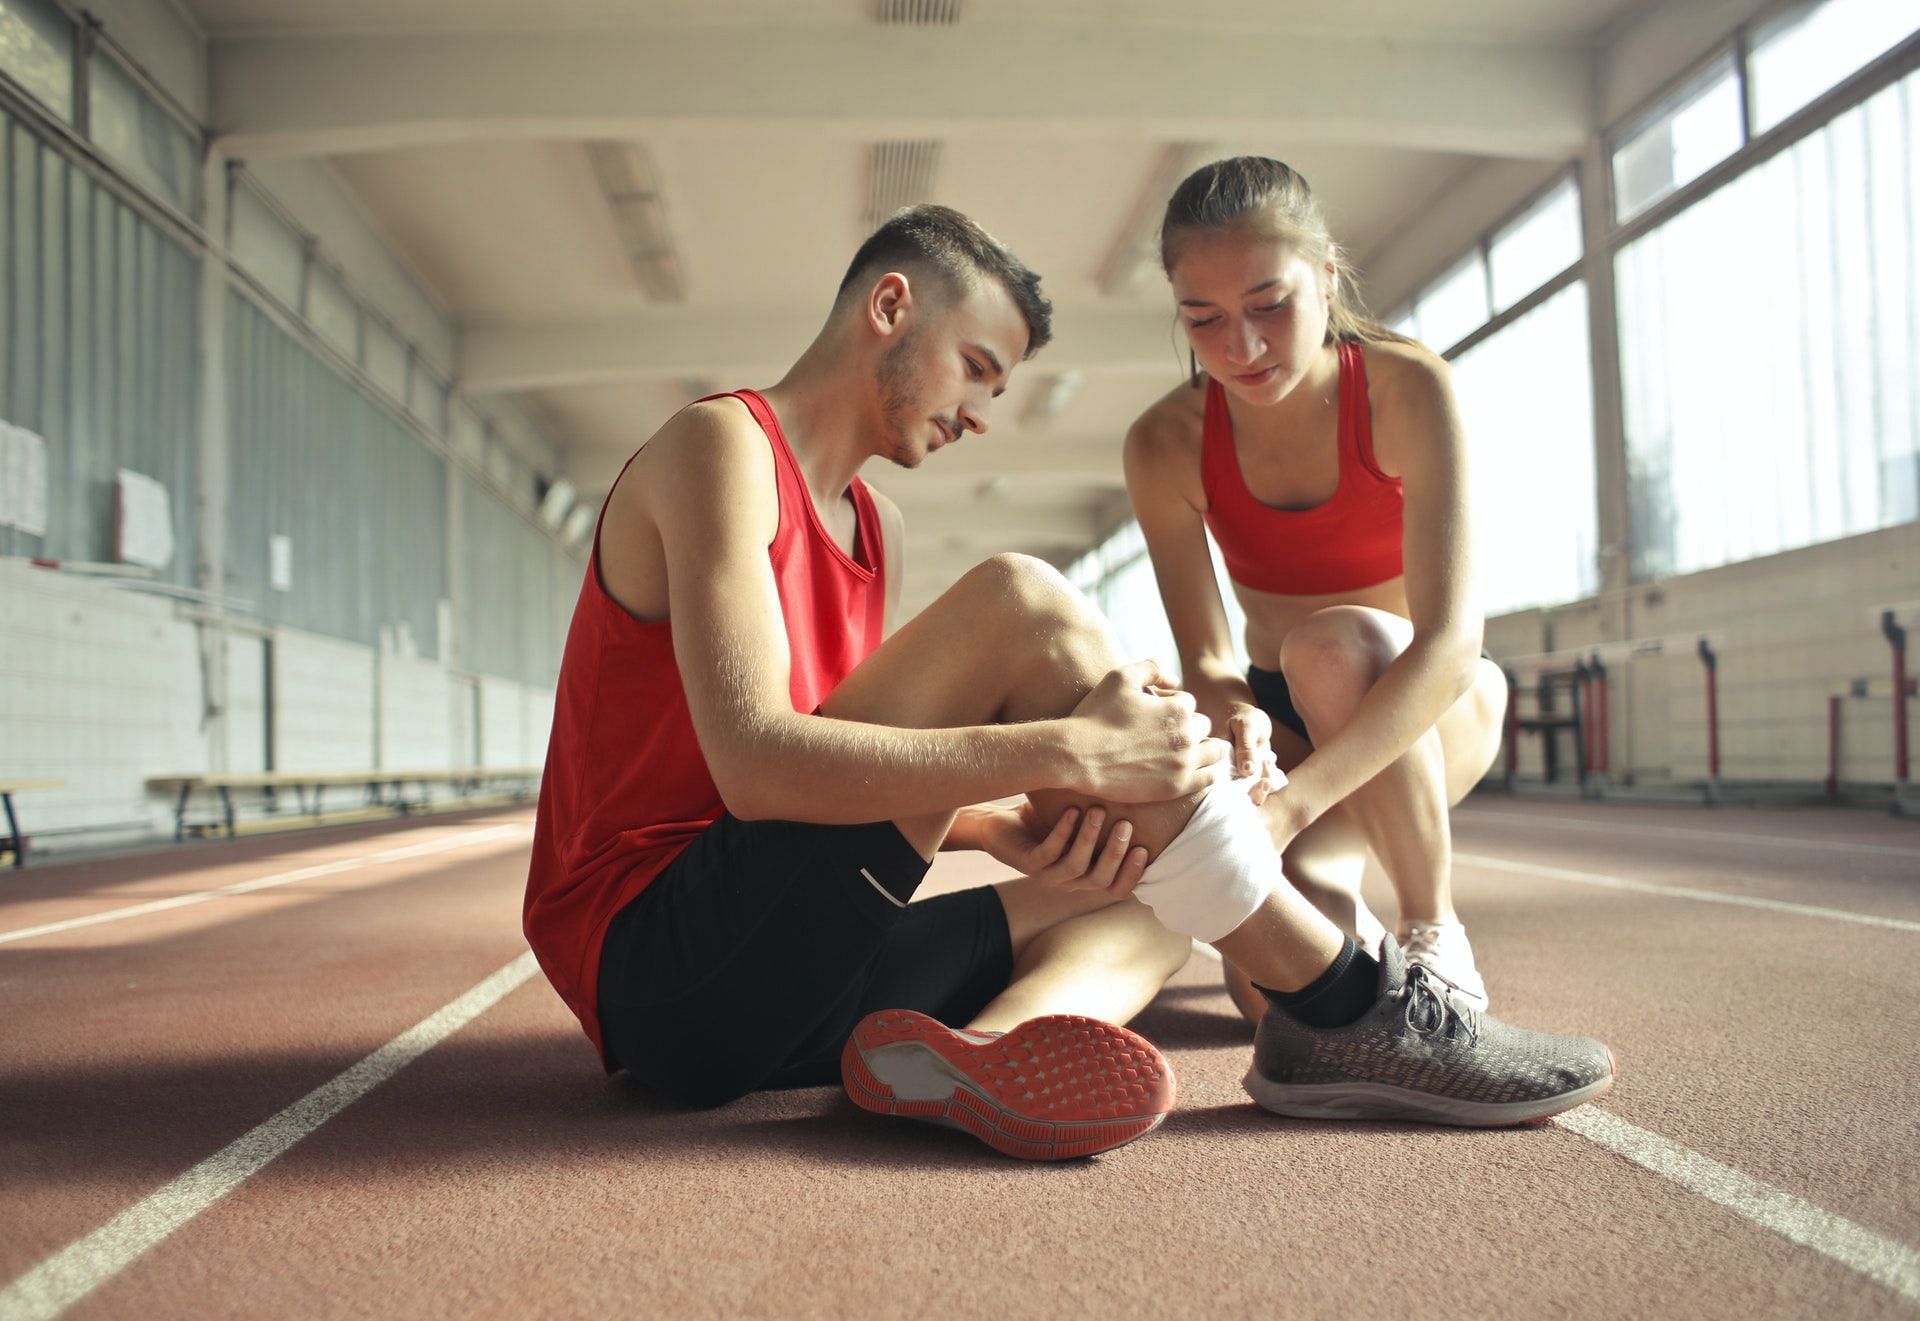 How to prevent injury during exercise? (image via Pexels/Photo by Andrea Piacquadio)